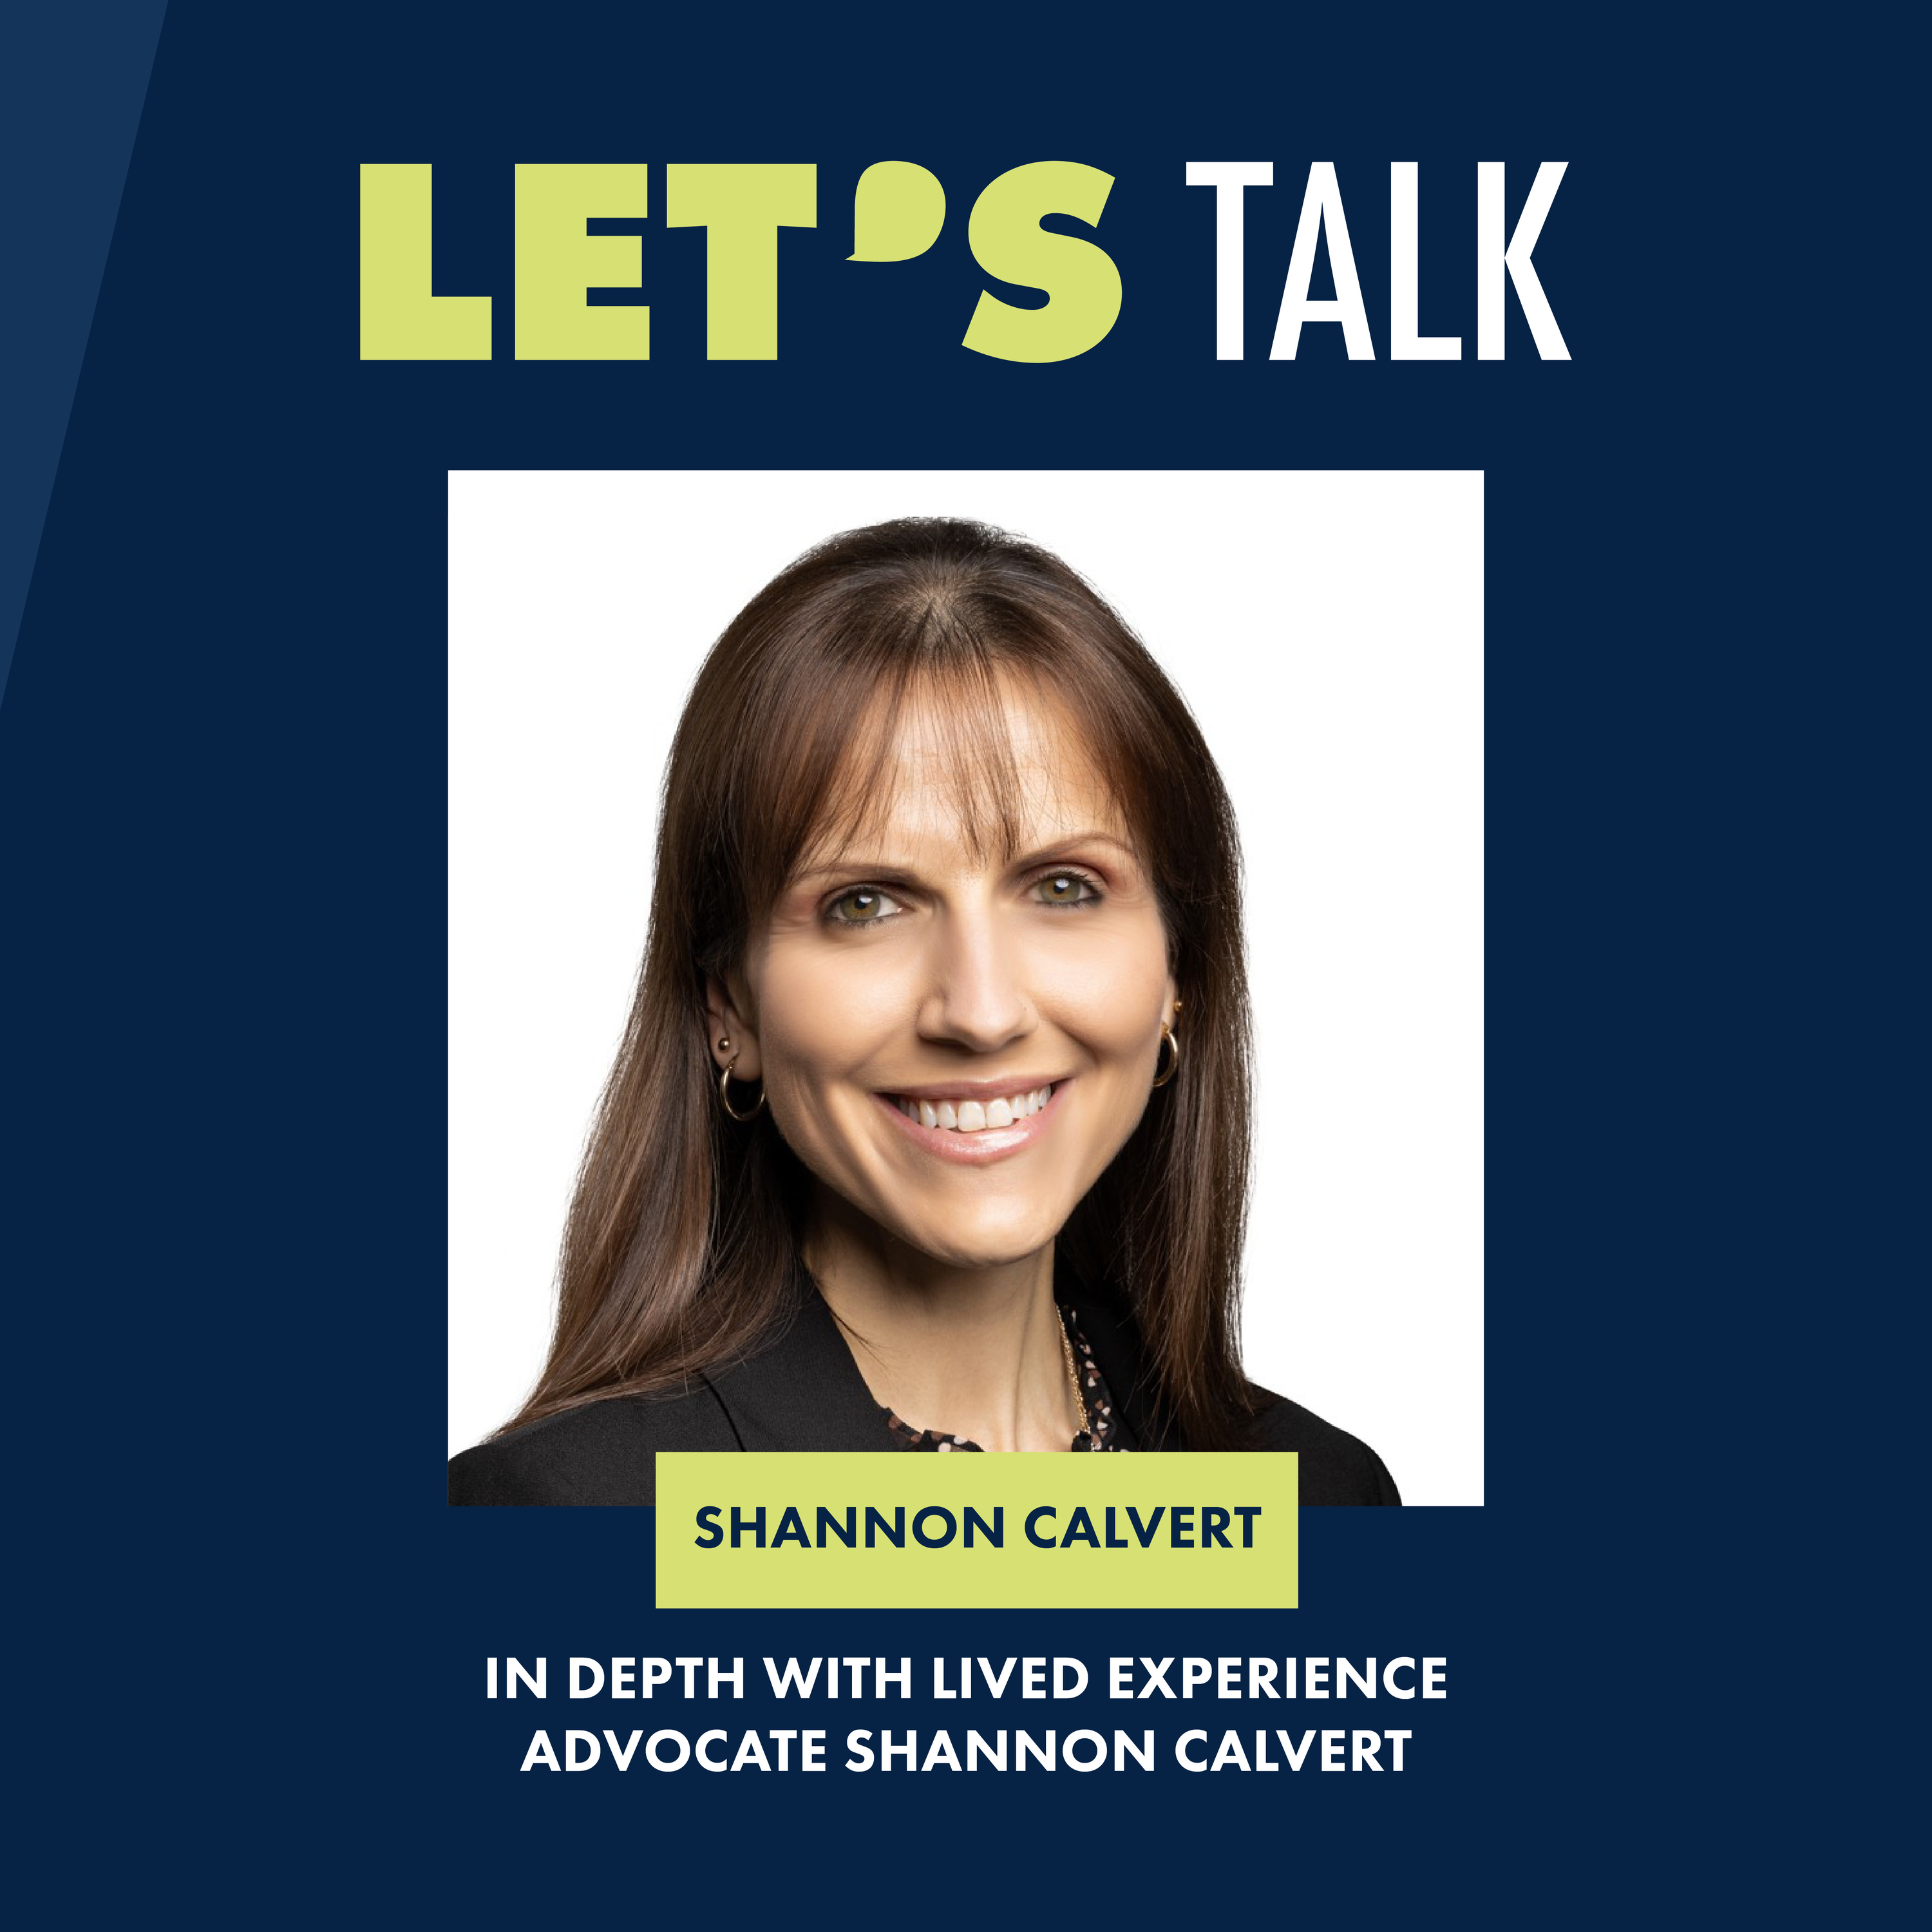 In depth with lived experience advocate Shannon Calvert